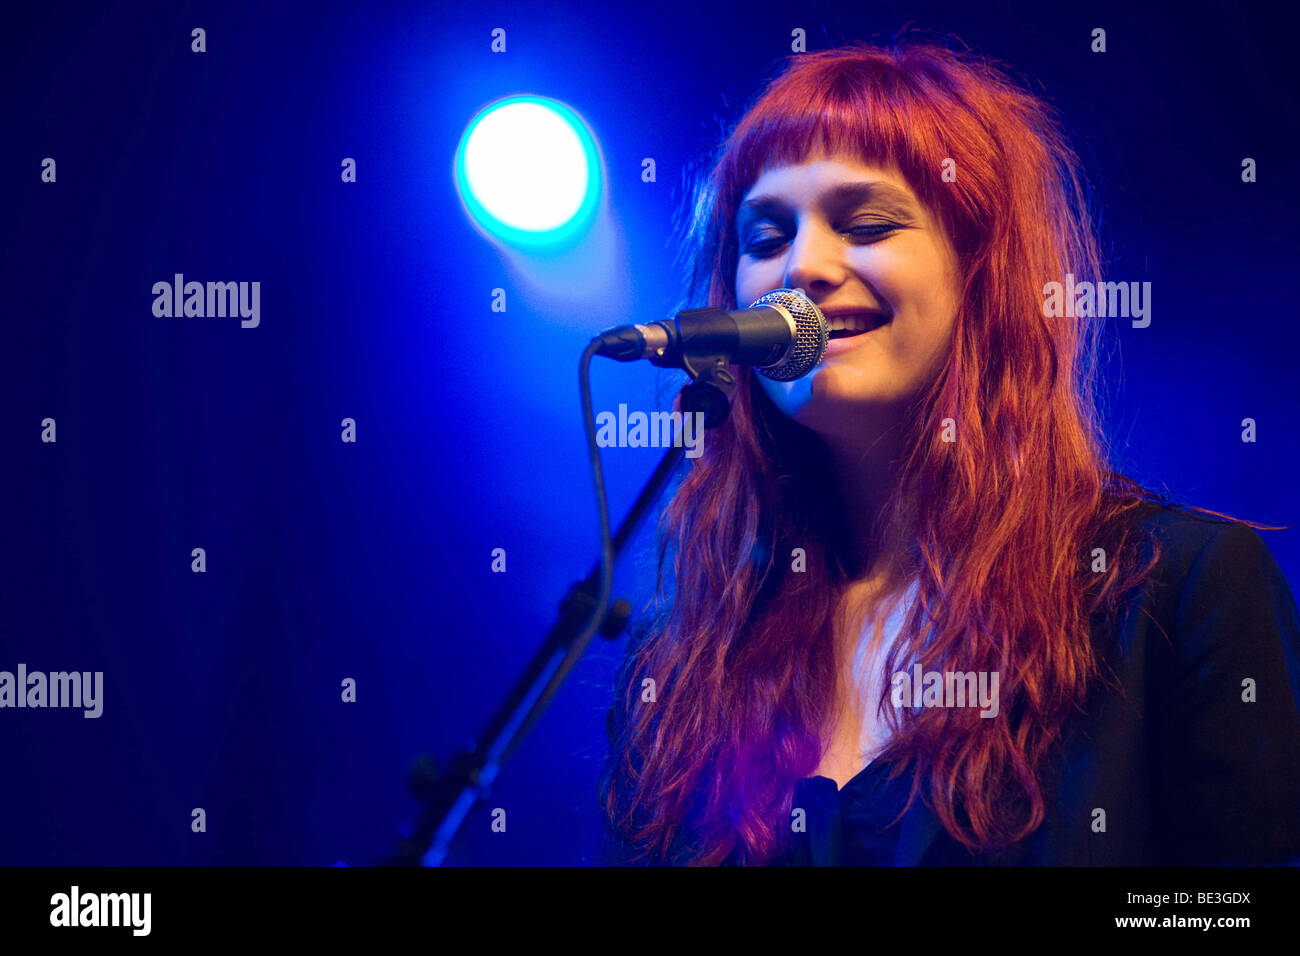 Alison Sudol aka A Fine Frenzy, U.S. singer-songwriter, live at the Blue Balls Festival in the concert hall of the KKL in Lucer Stock Photo